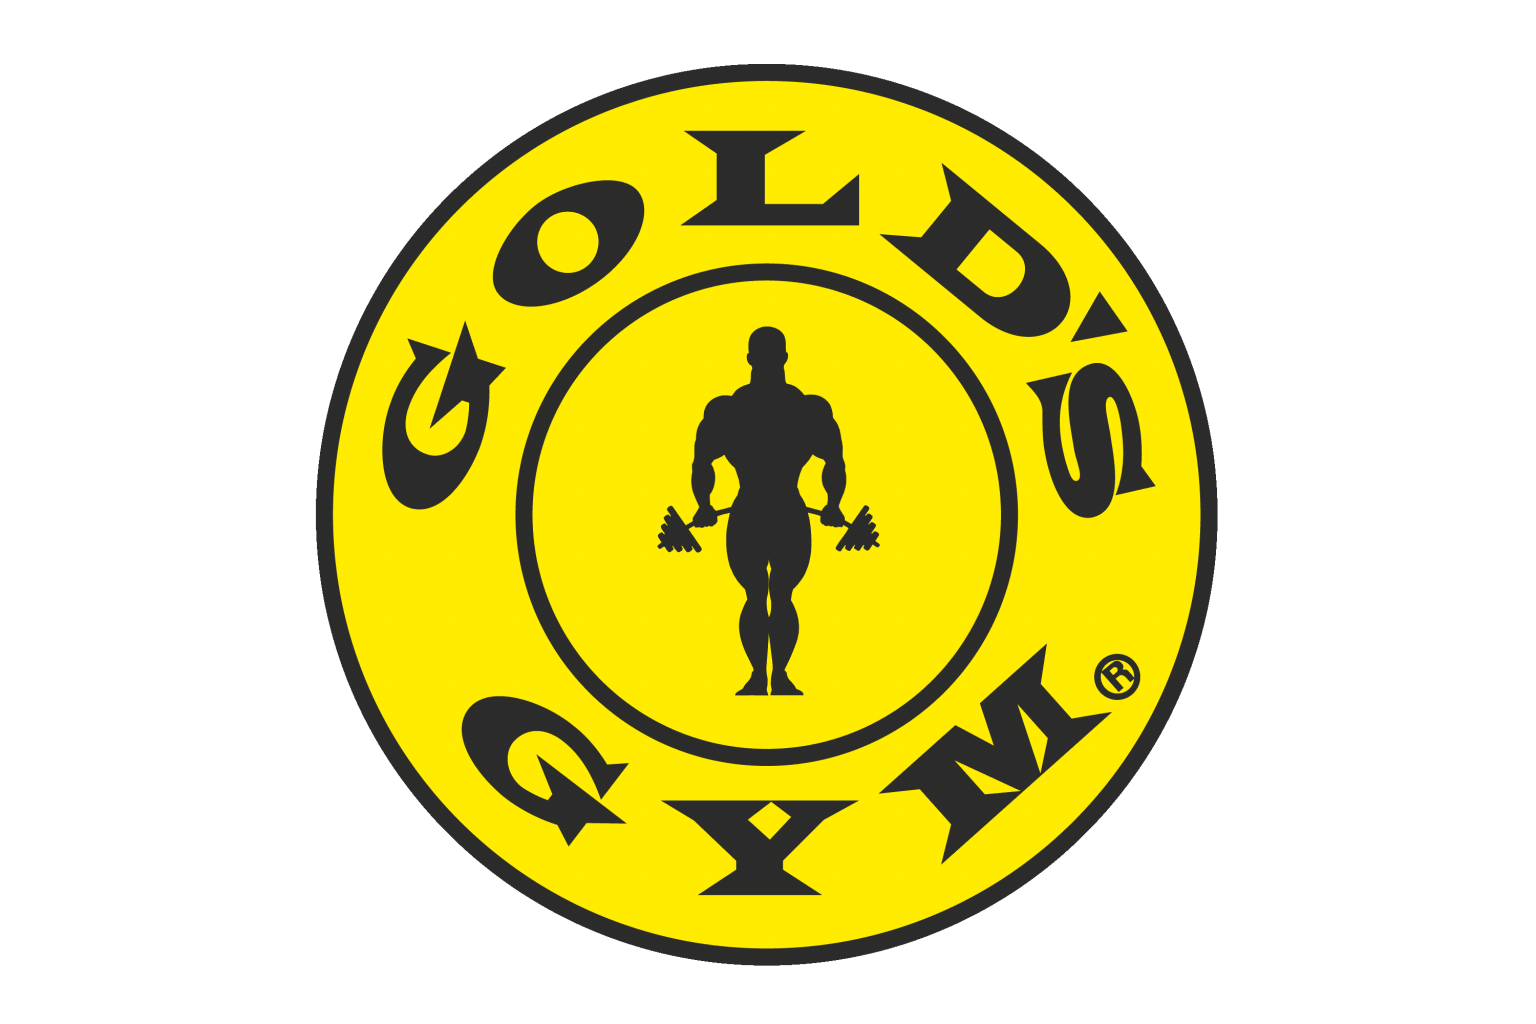 Golds Gym Logo And Symbol Meaning History Png